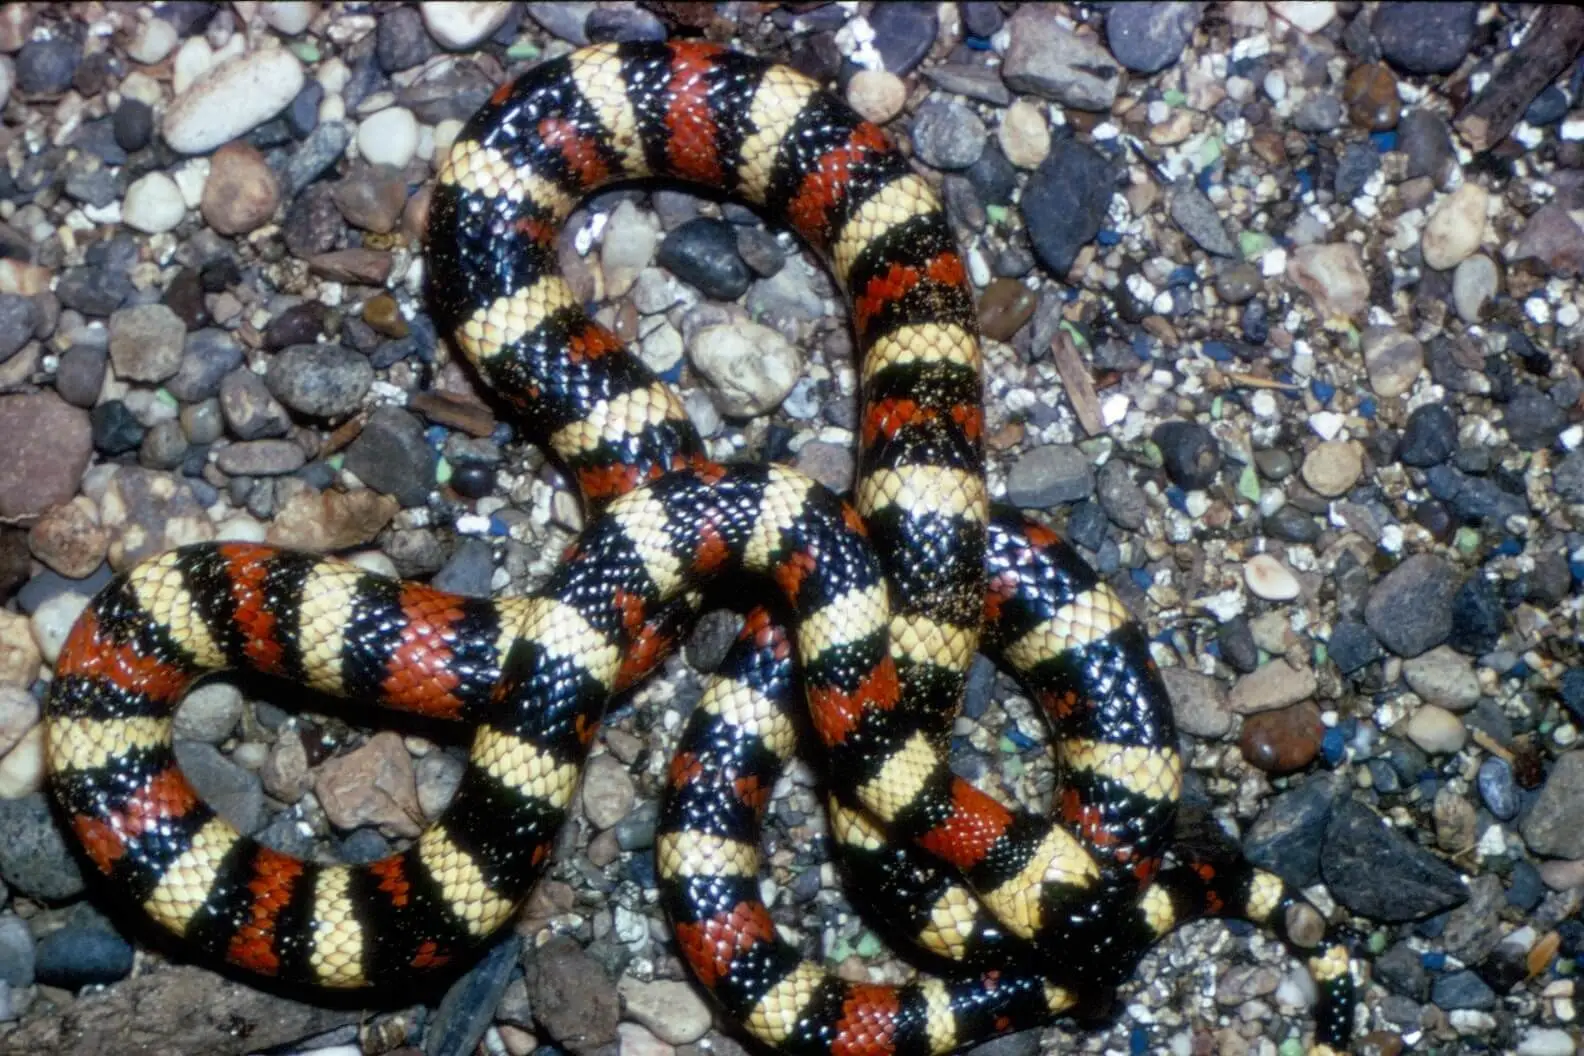 California Mountain Kingsnake by California Dept of Fish and Wildlife